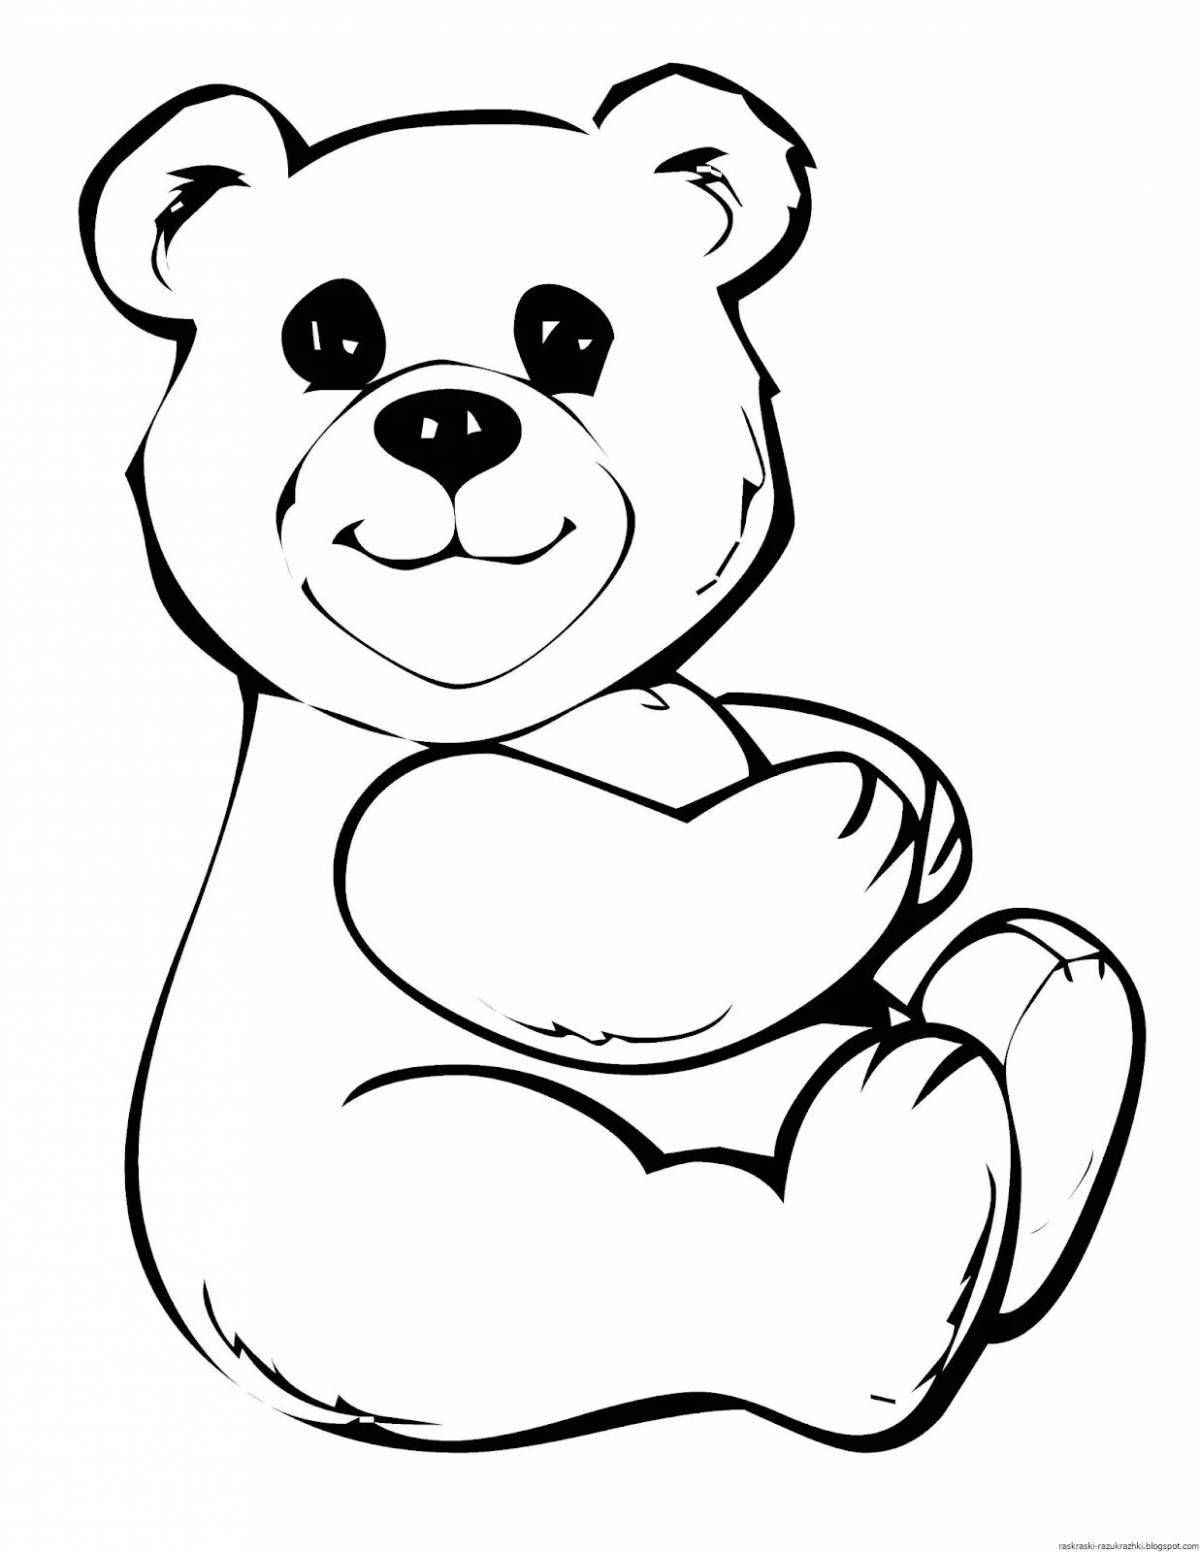 Cozy teddy bear coloring book for kids